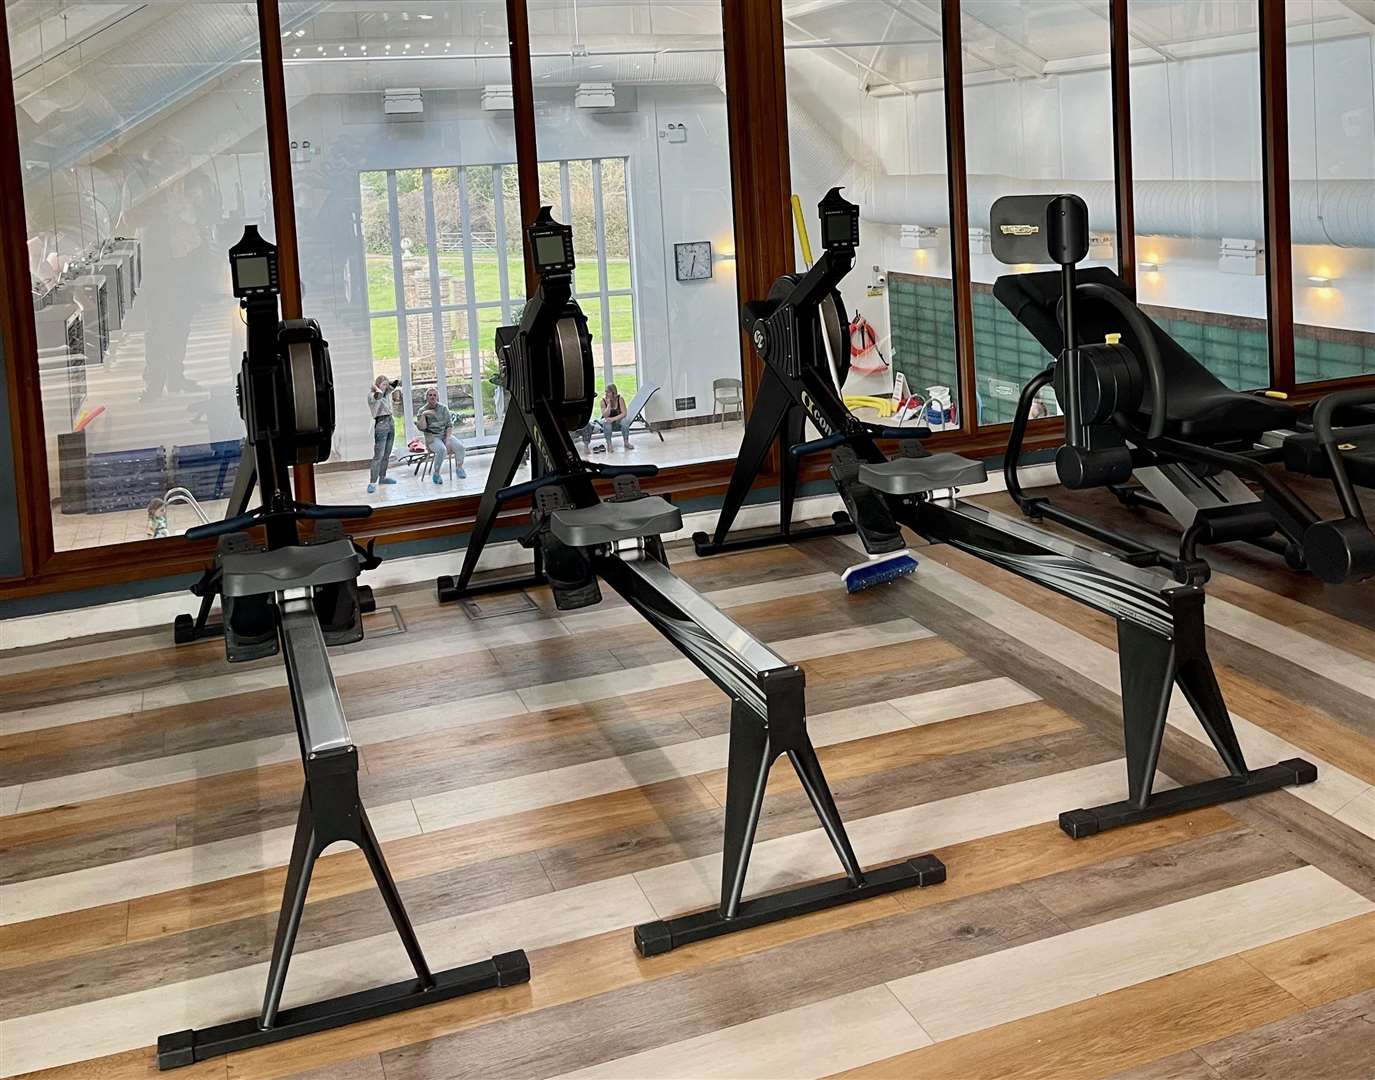 Rowing machines at the sports club in Tonbridge